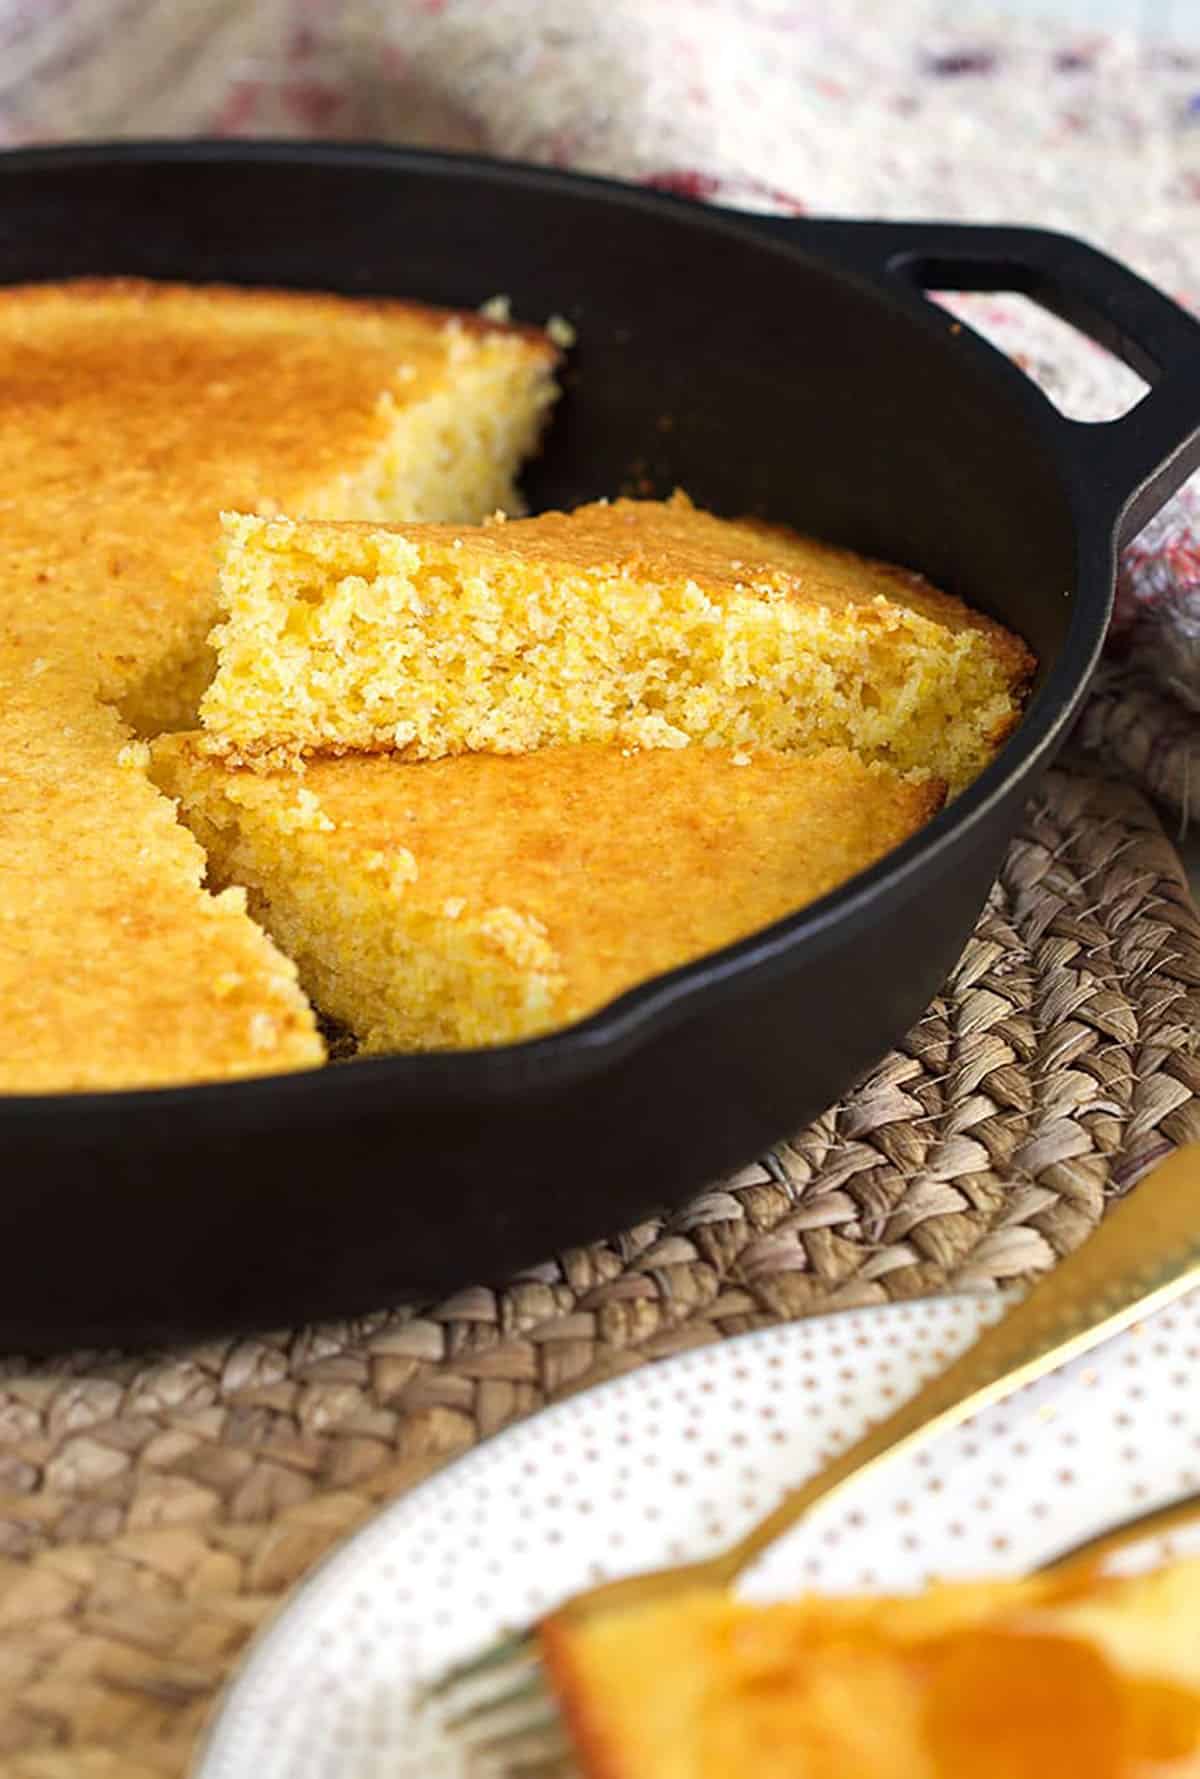 Cornbread is sliced in pieces in a black skillet.